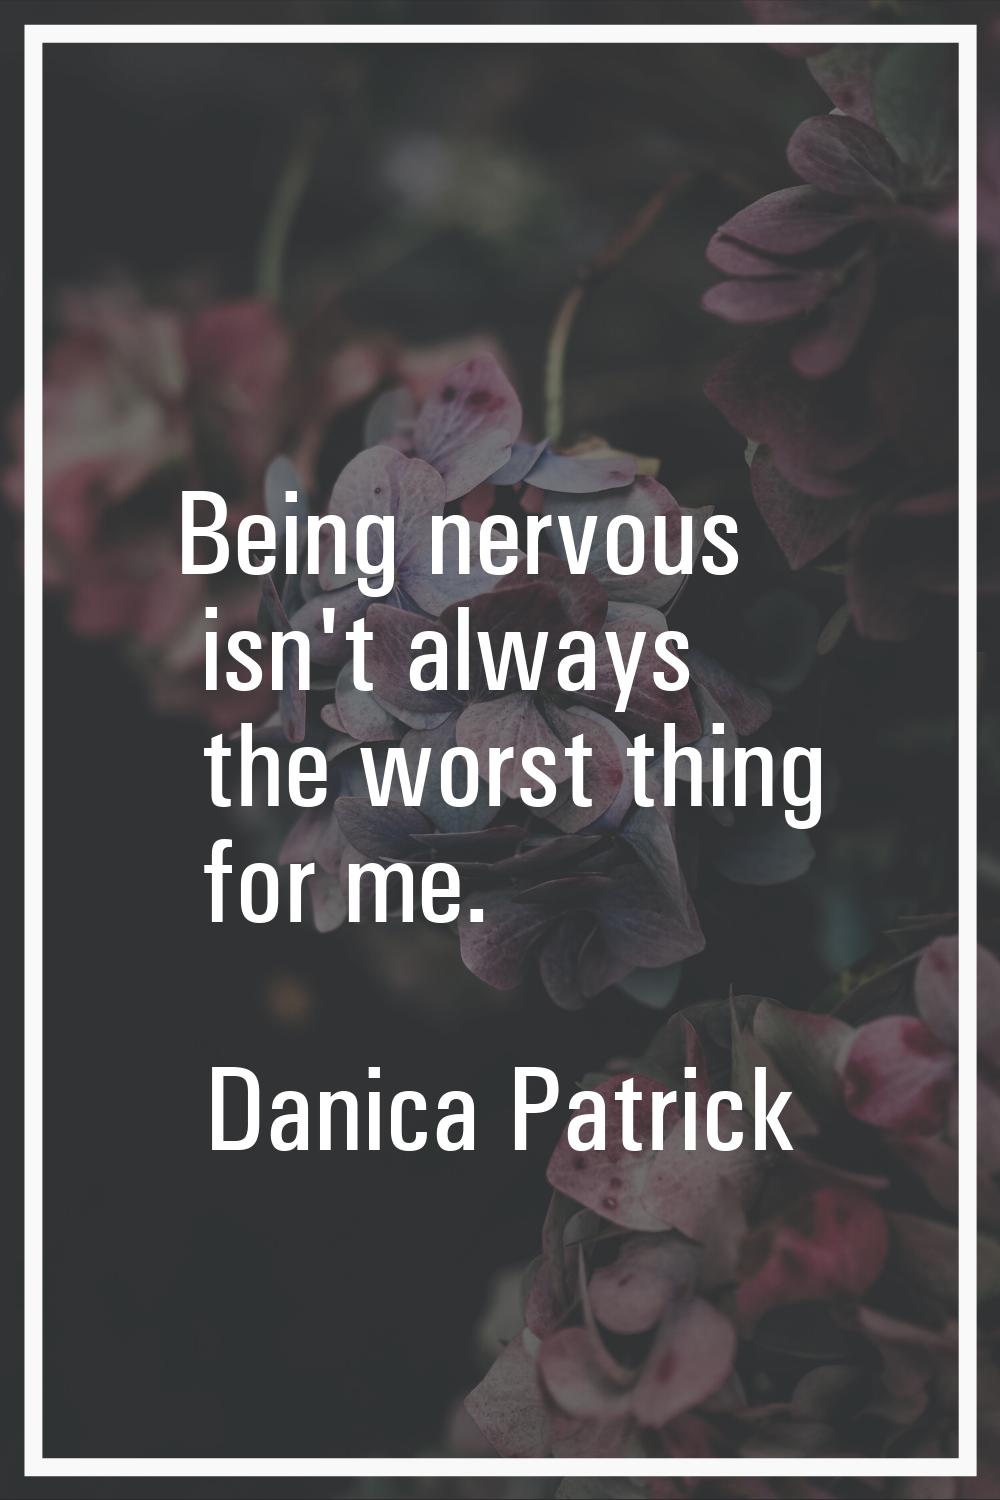 Being nervous isn't always the worst thing for me.